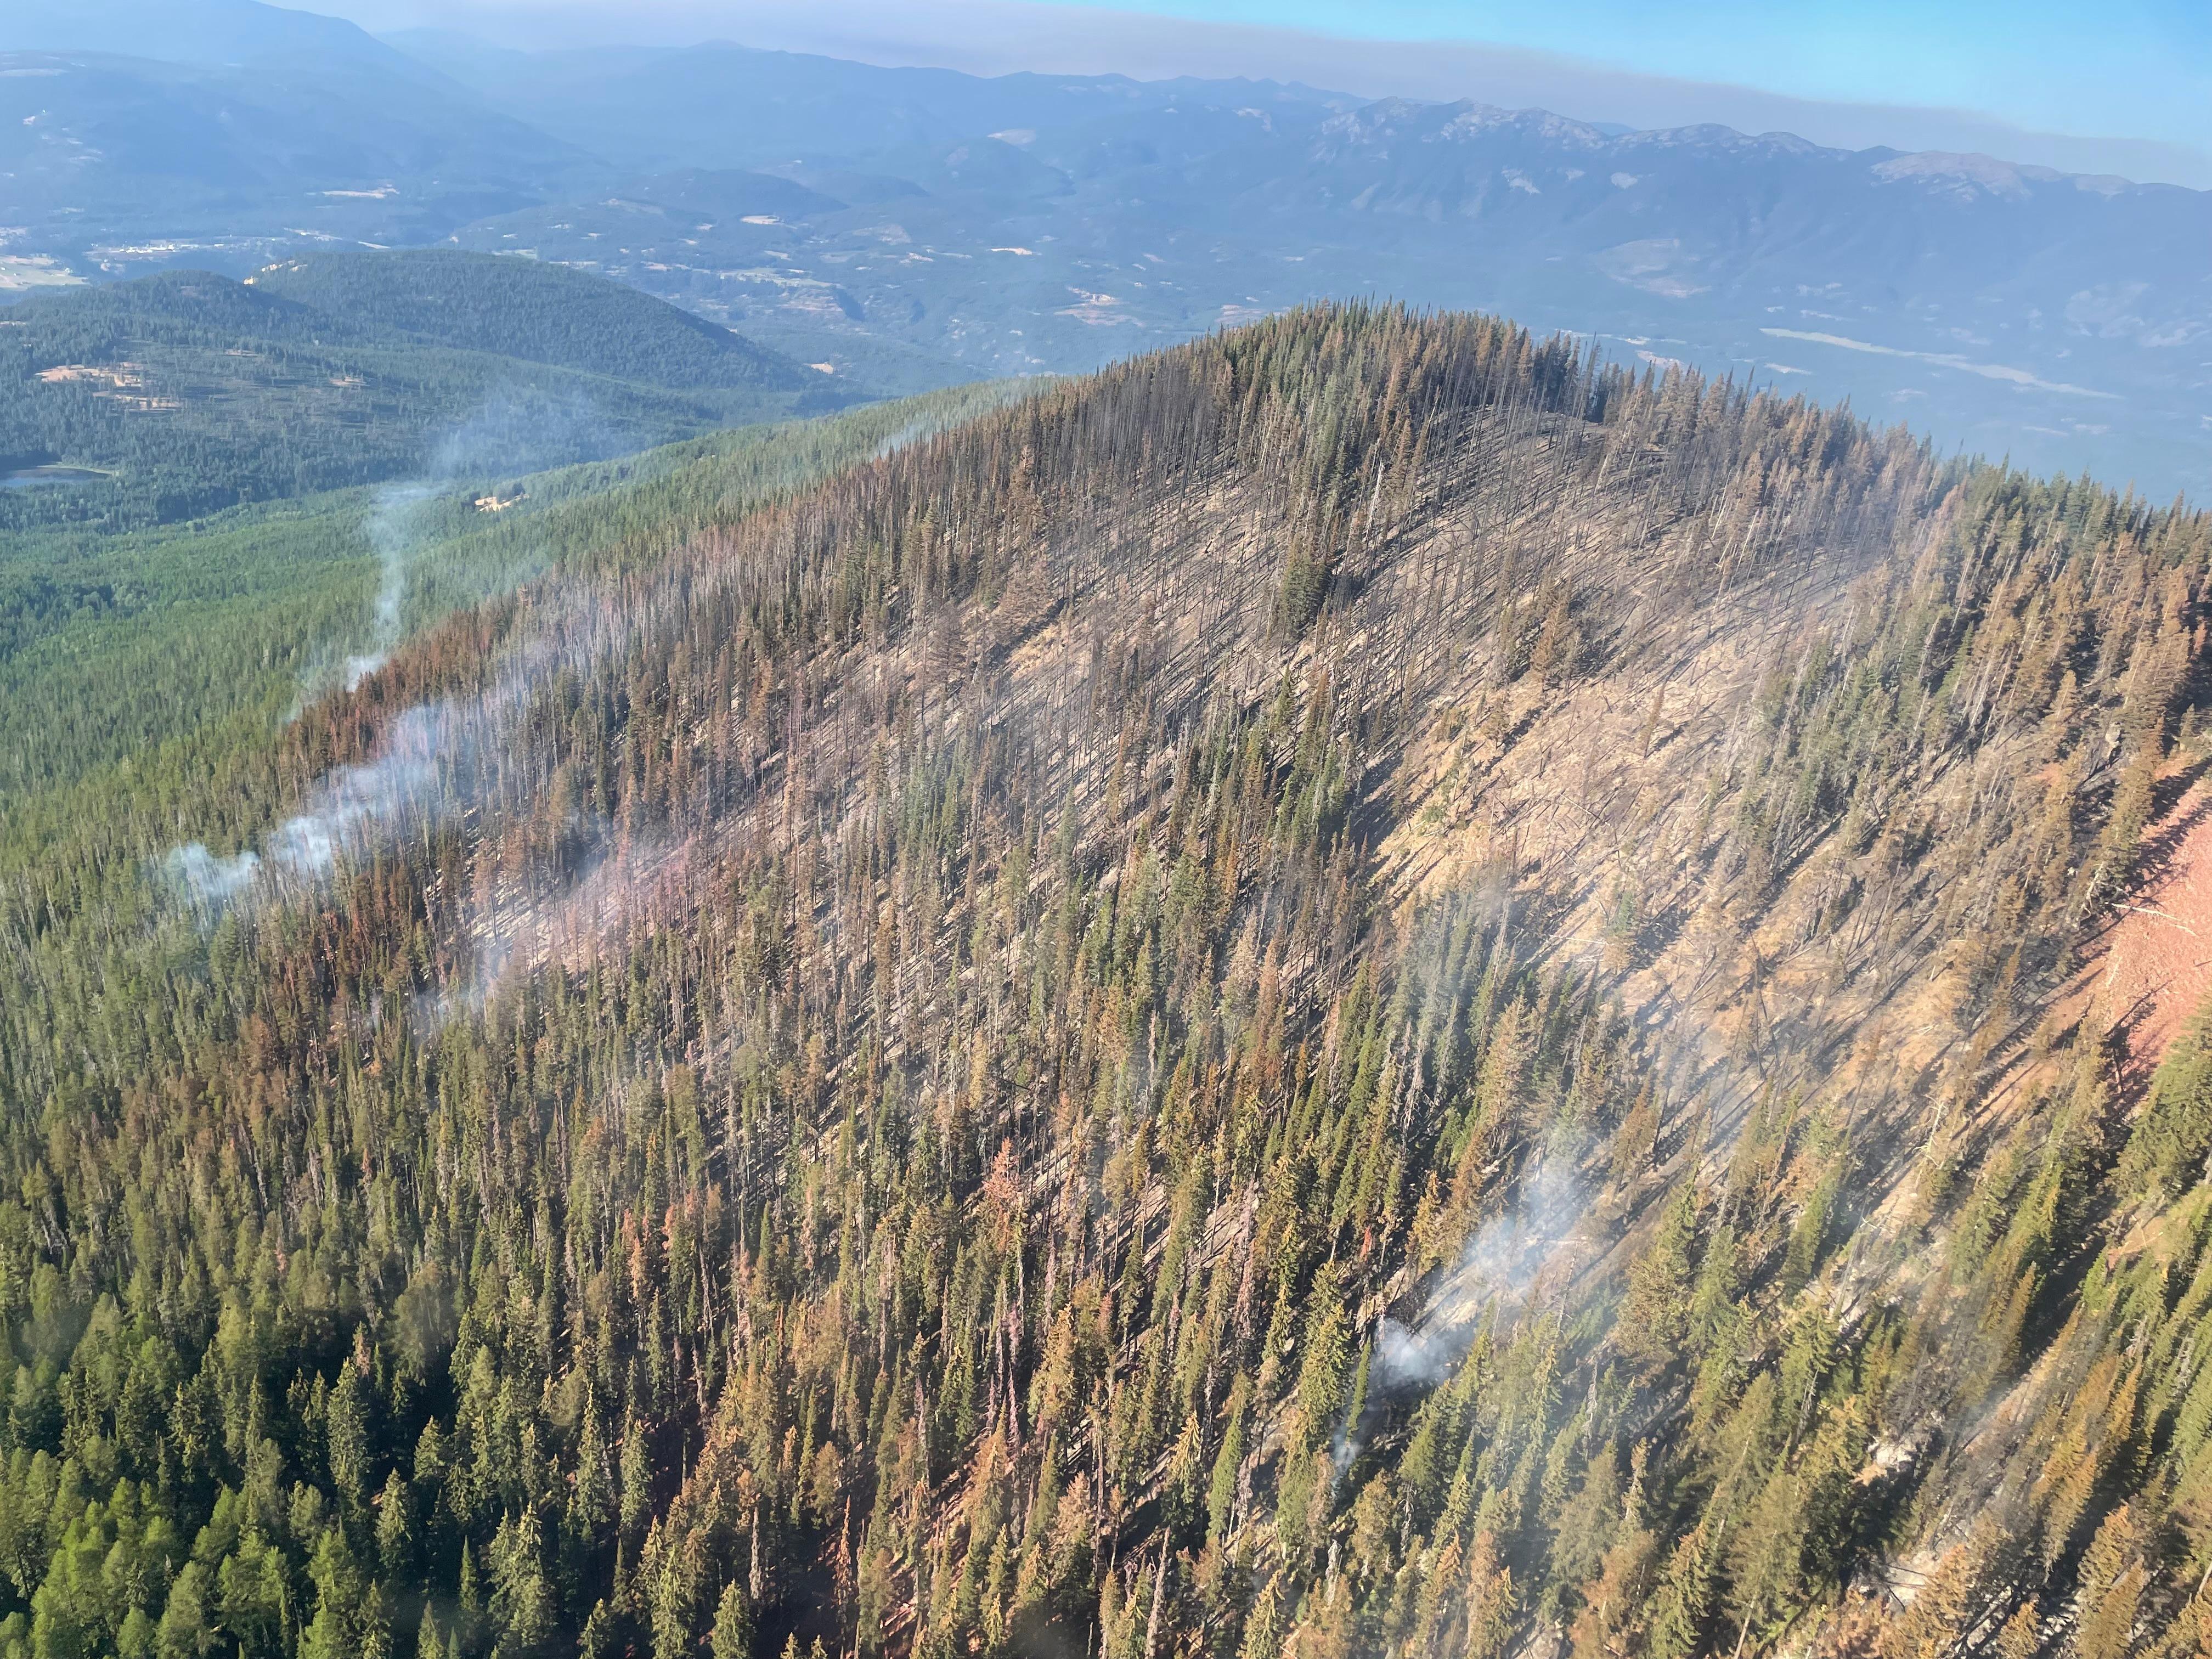 Aerial View of Katka Fire - Kootenai River Complex. View from the helicopter looking at Katka Peak with red fire retardant below fire. Peak has a few open areas near ridge with burned trees.  